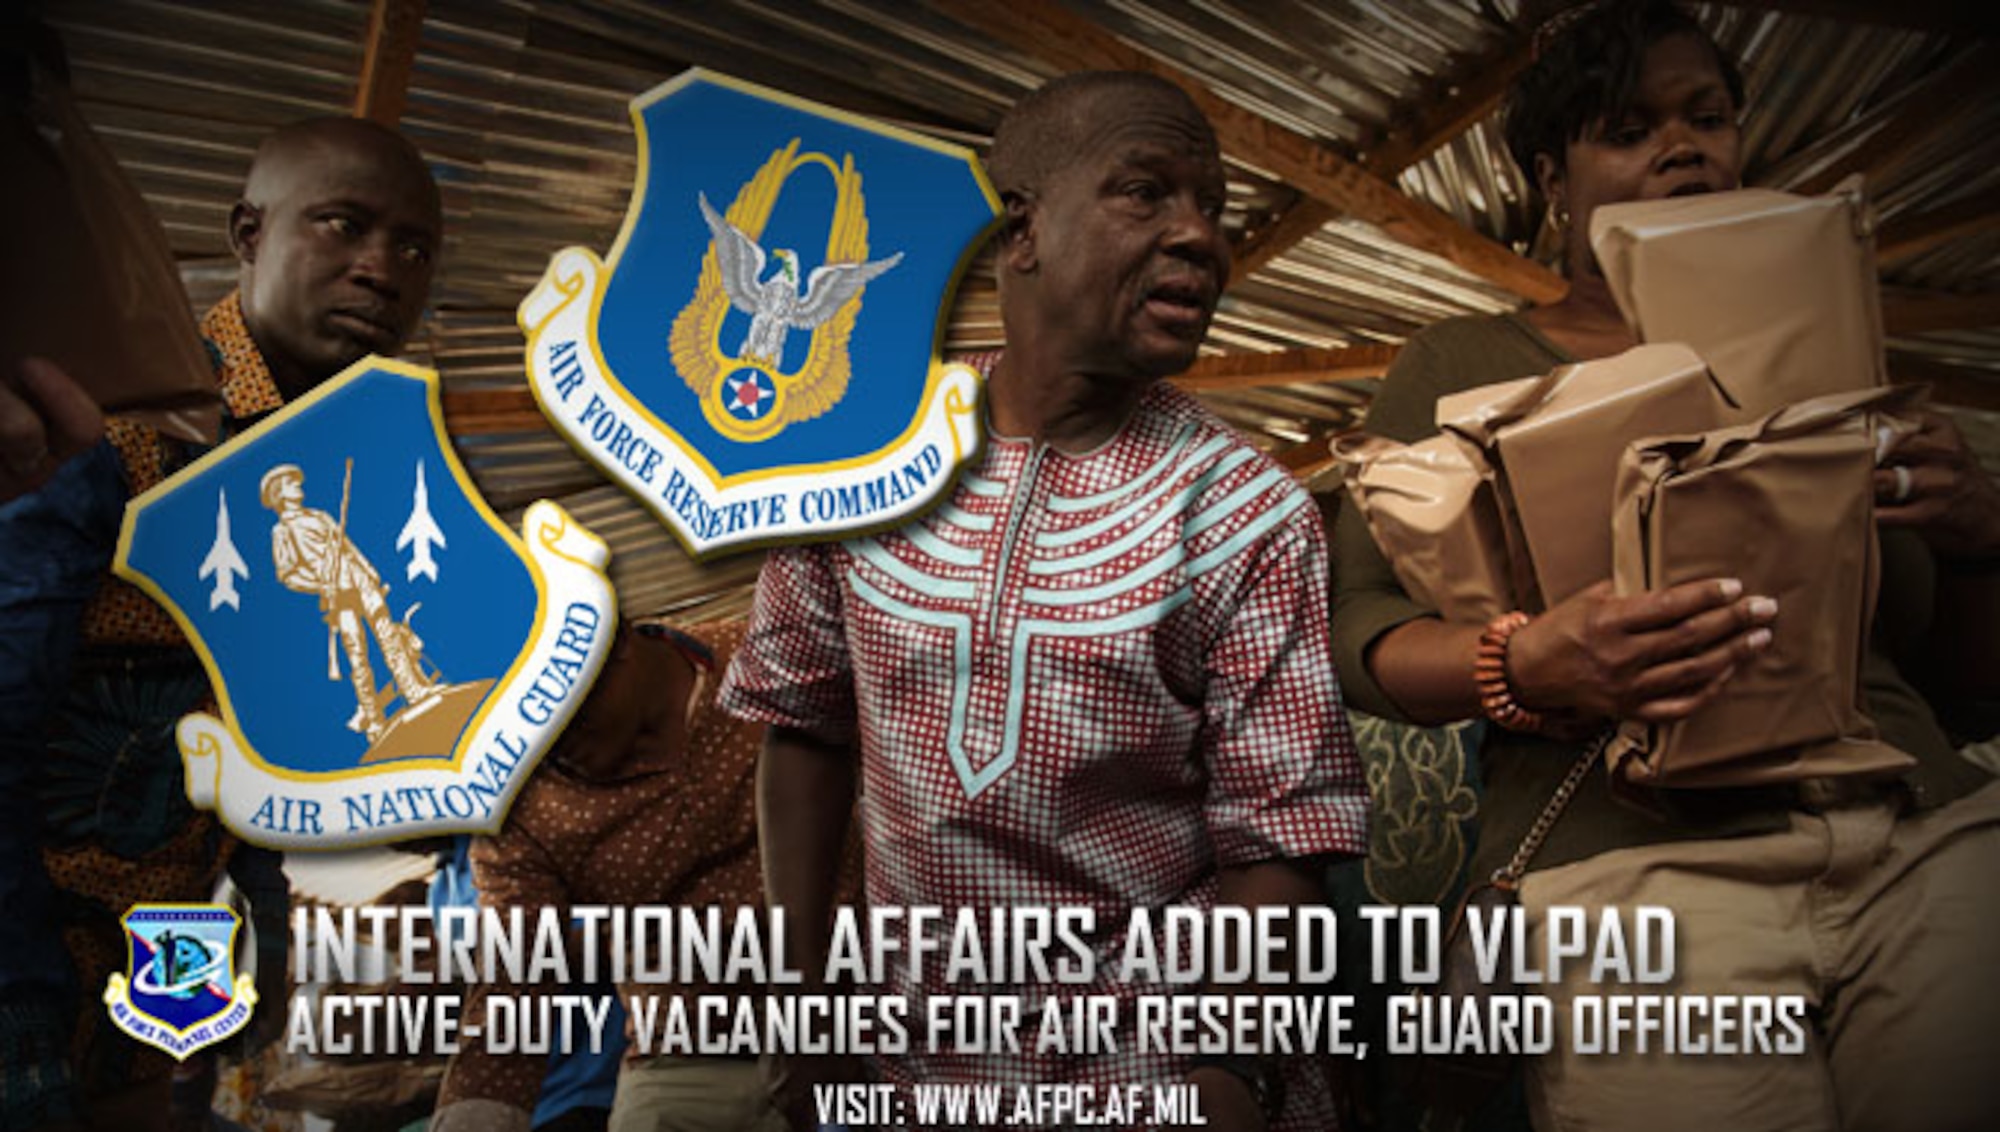 The Air Force Voluntary Limited Period of Active Duty program has added two international affairs specialties to the 2017 listing of opportunities. VLPAD gives certain Reserve and Guard Airmen the chance to serve on active duty for three years and one day while receiving active-duty benefits in order to meet increased Air Force mission requirements. (U.S. Air Force photo by Staff Sgt. Jonathan Snyder)